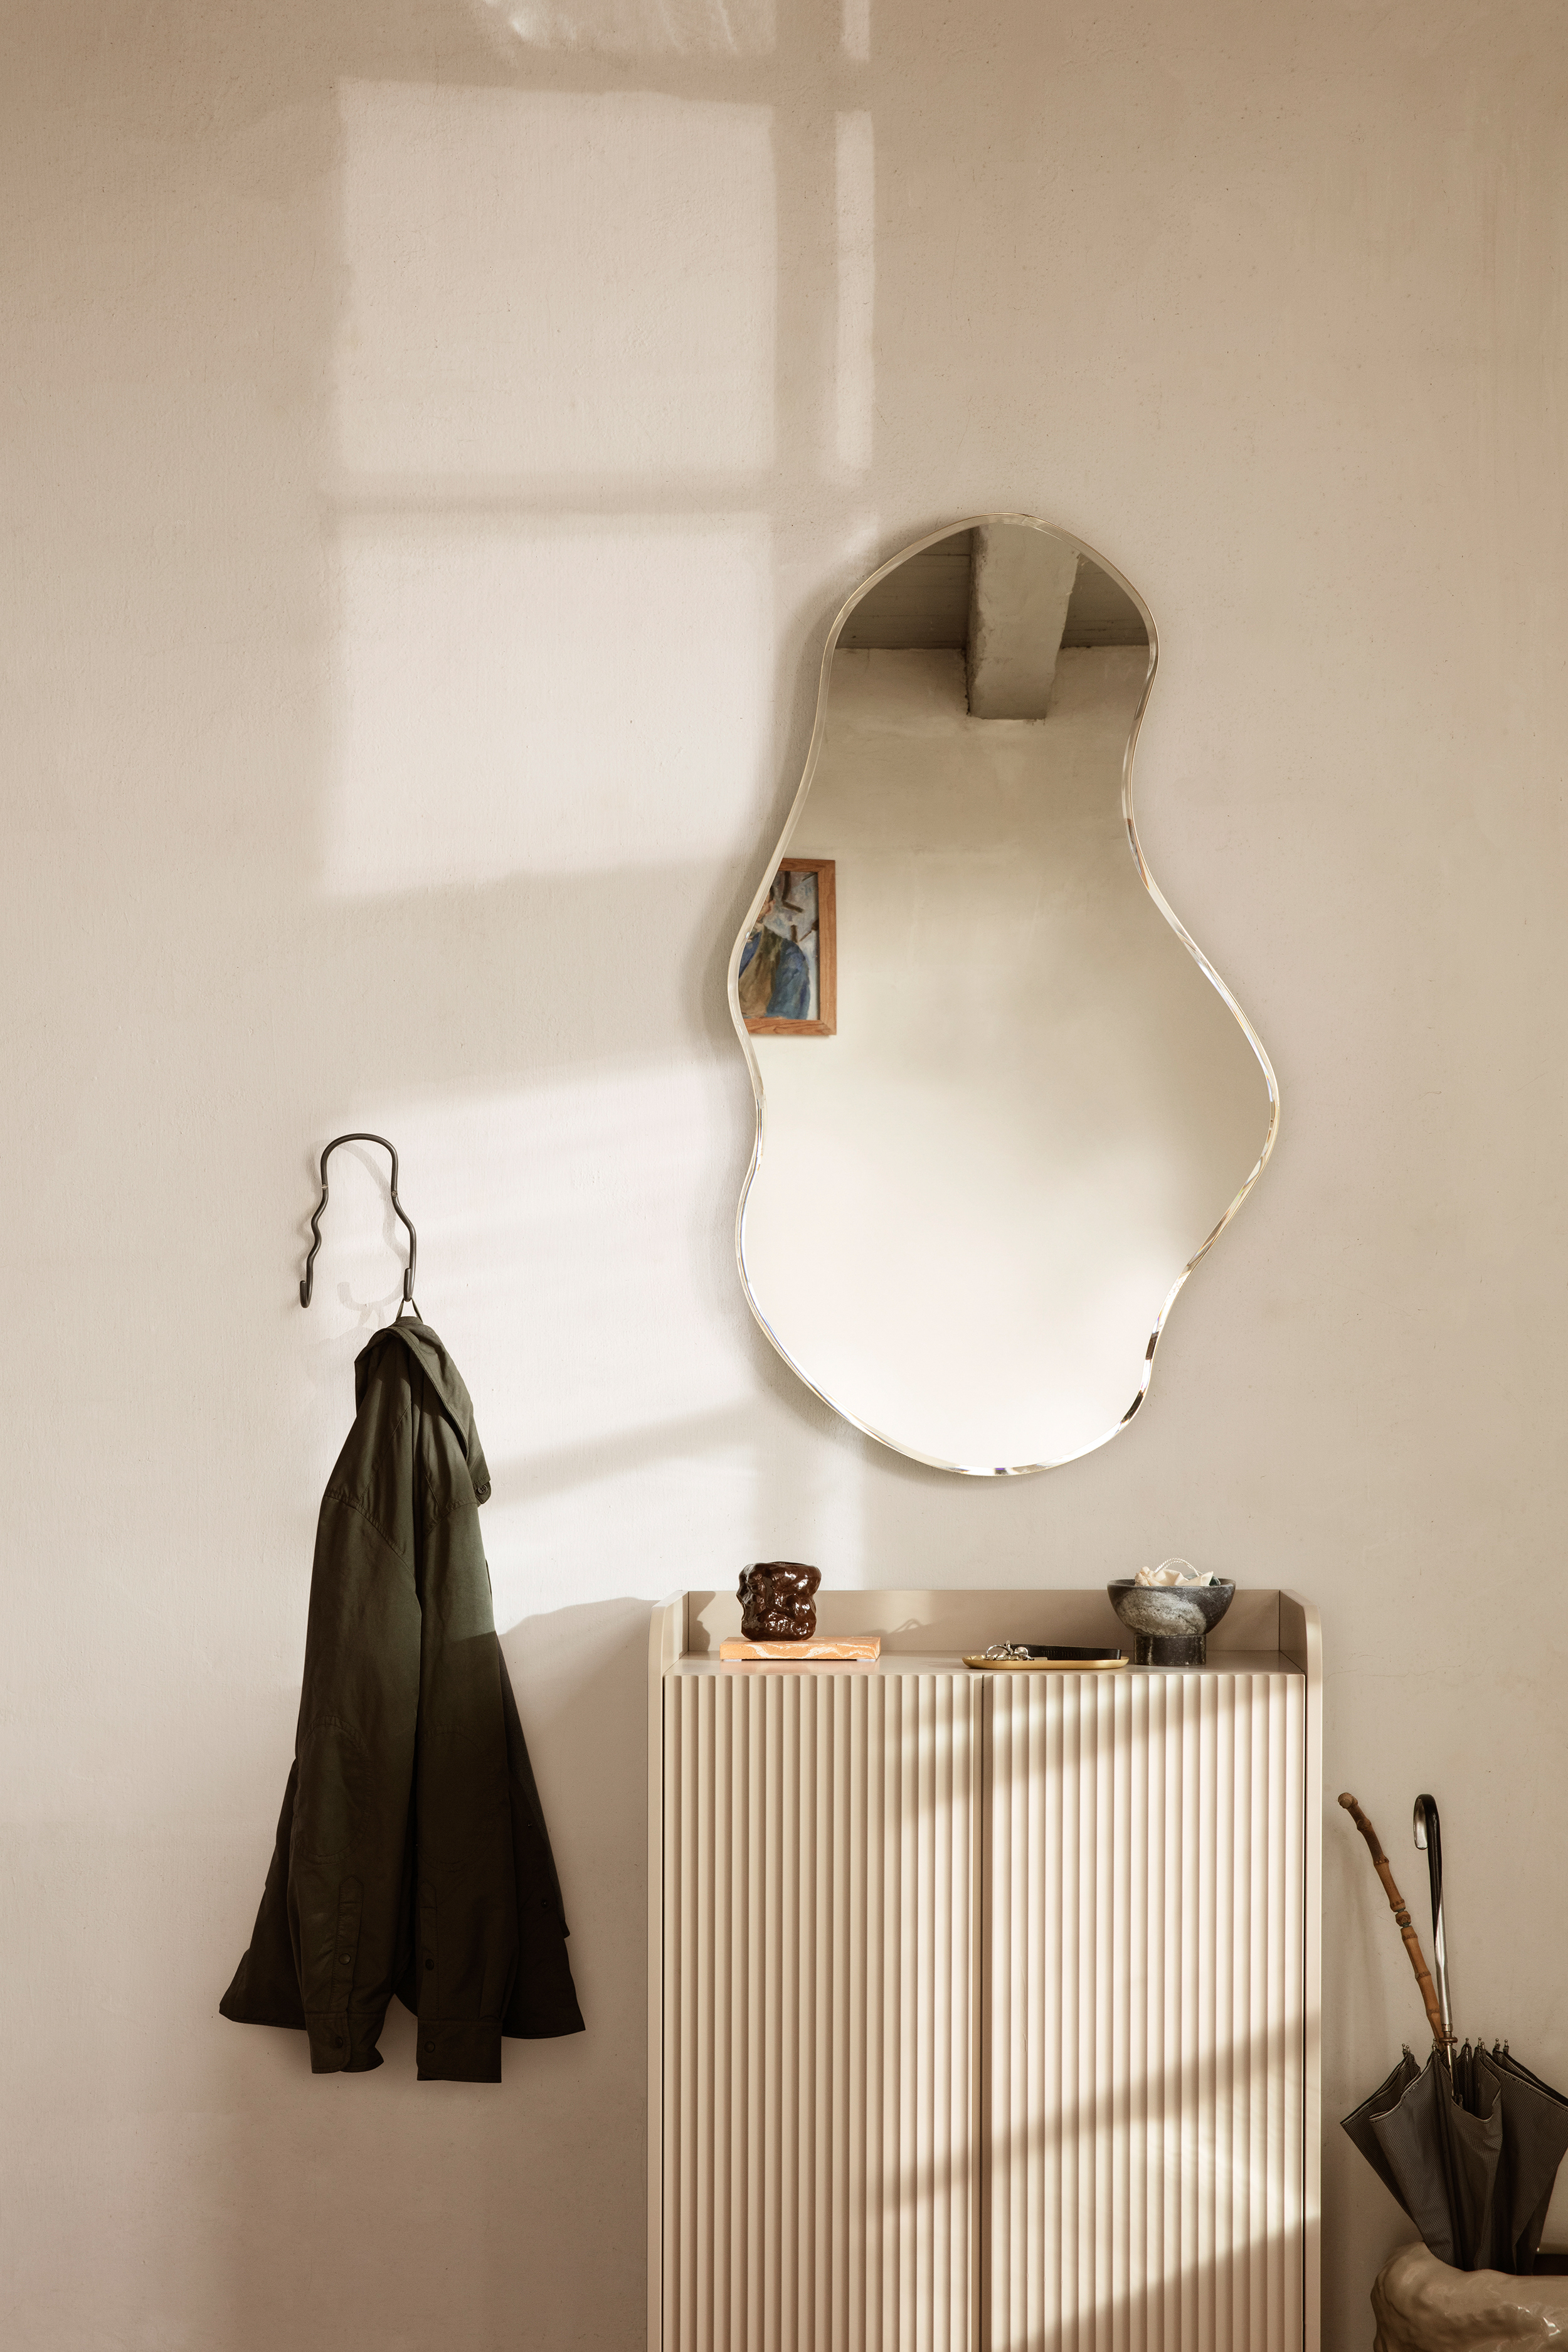 Pond mirror from Ferm LIVING - NordicNest.com